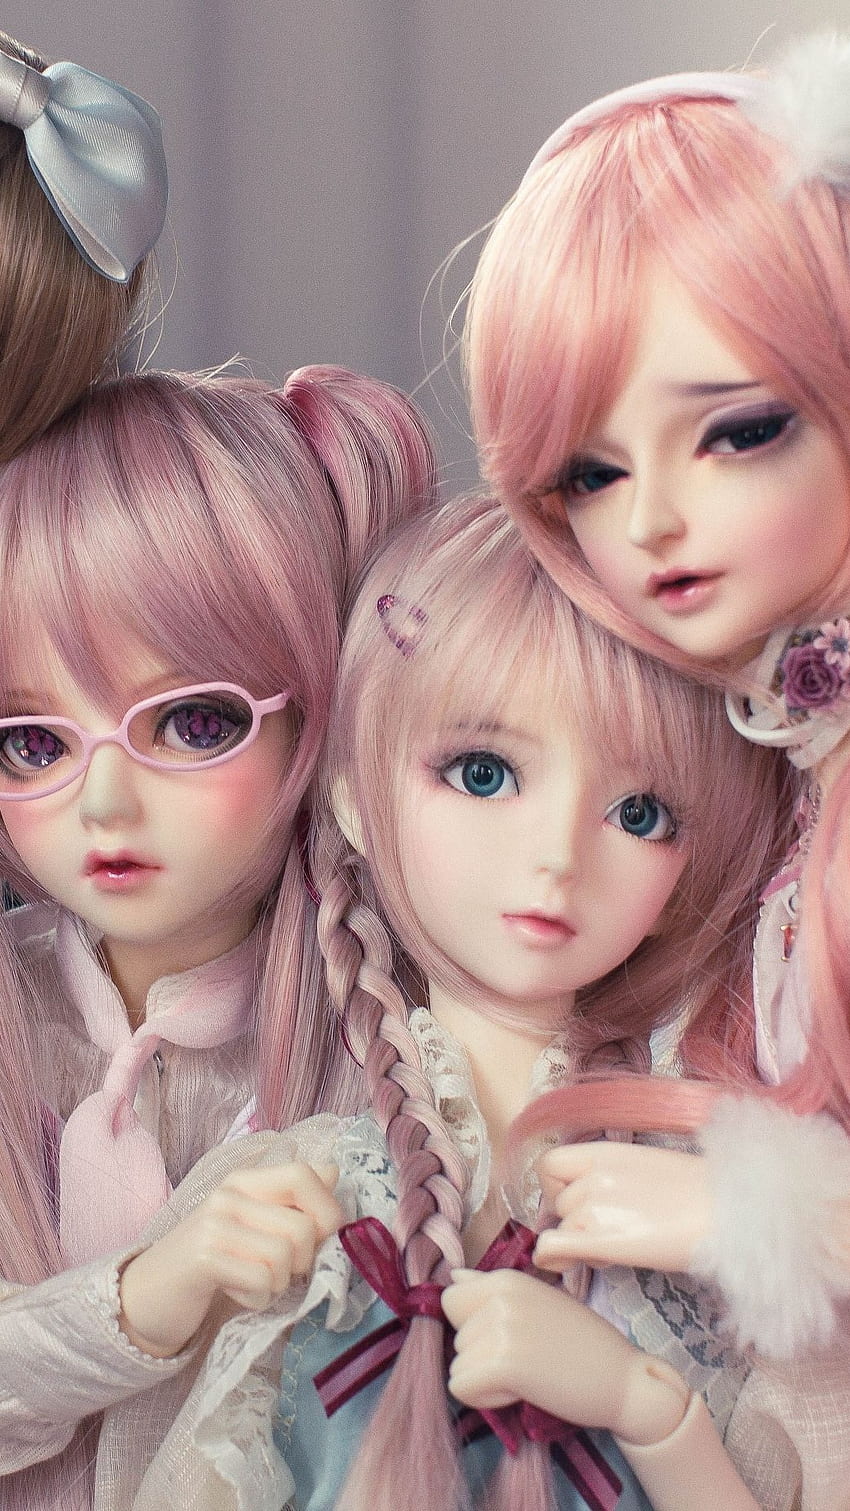 Top 999+ doll friends images – Amazing Collection doll friends images Full 4K